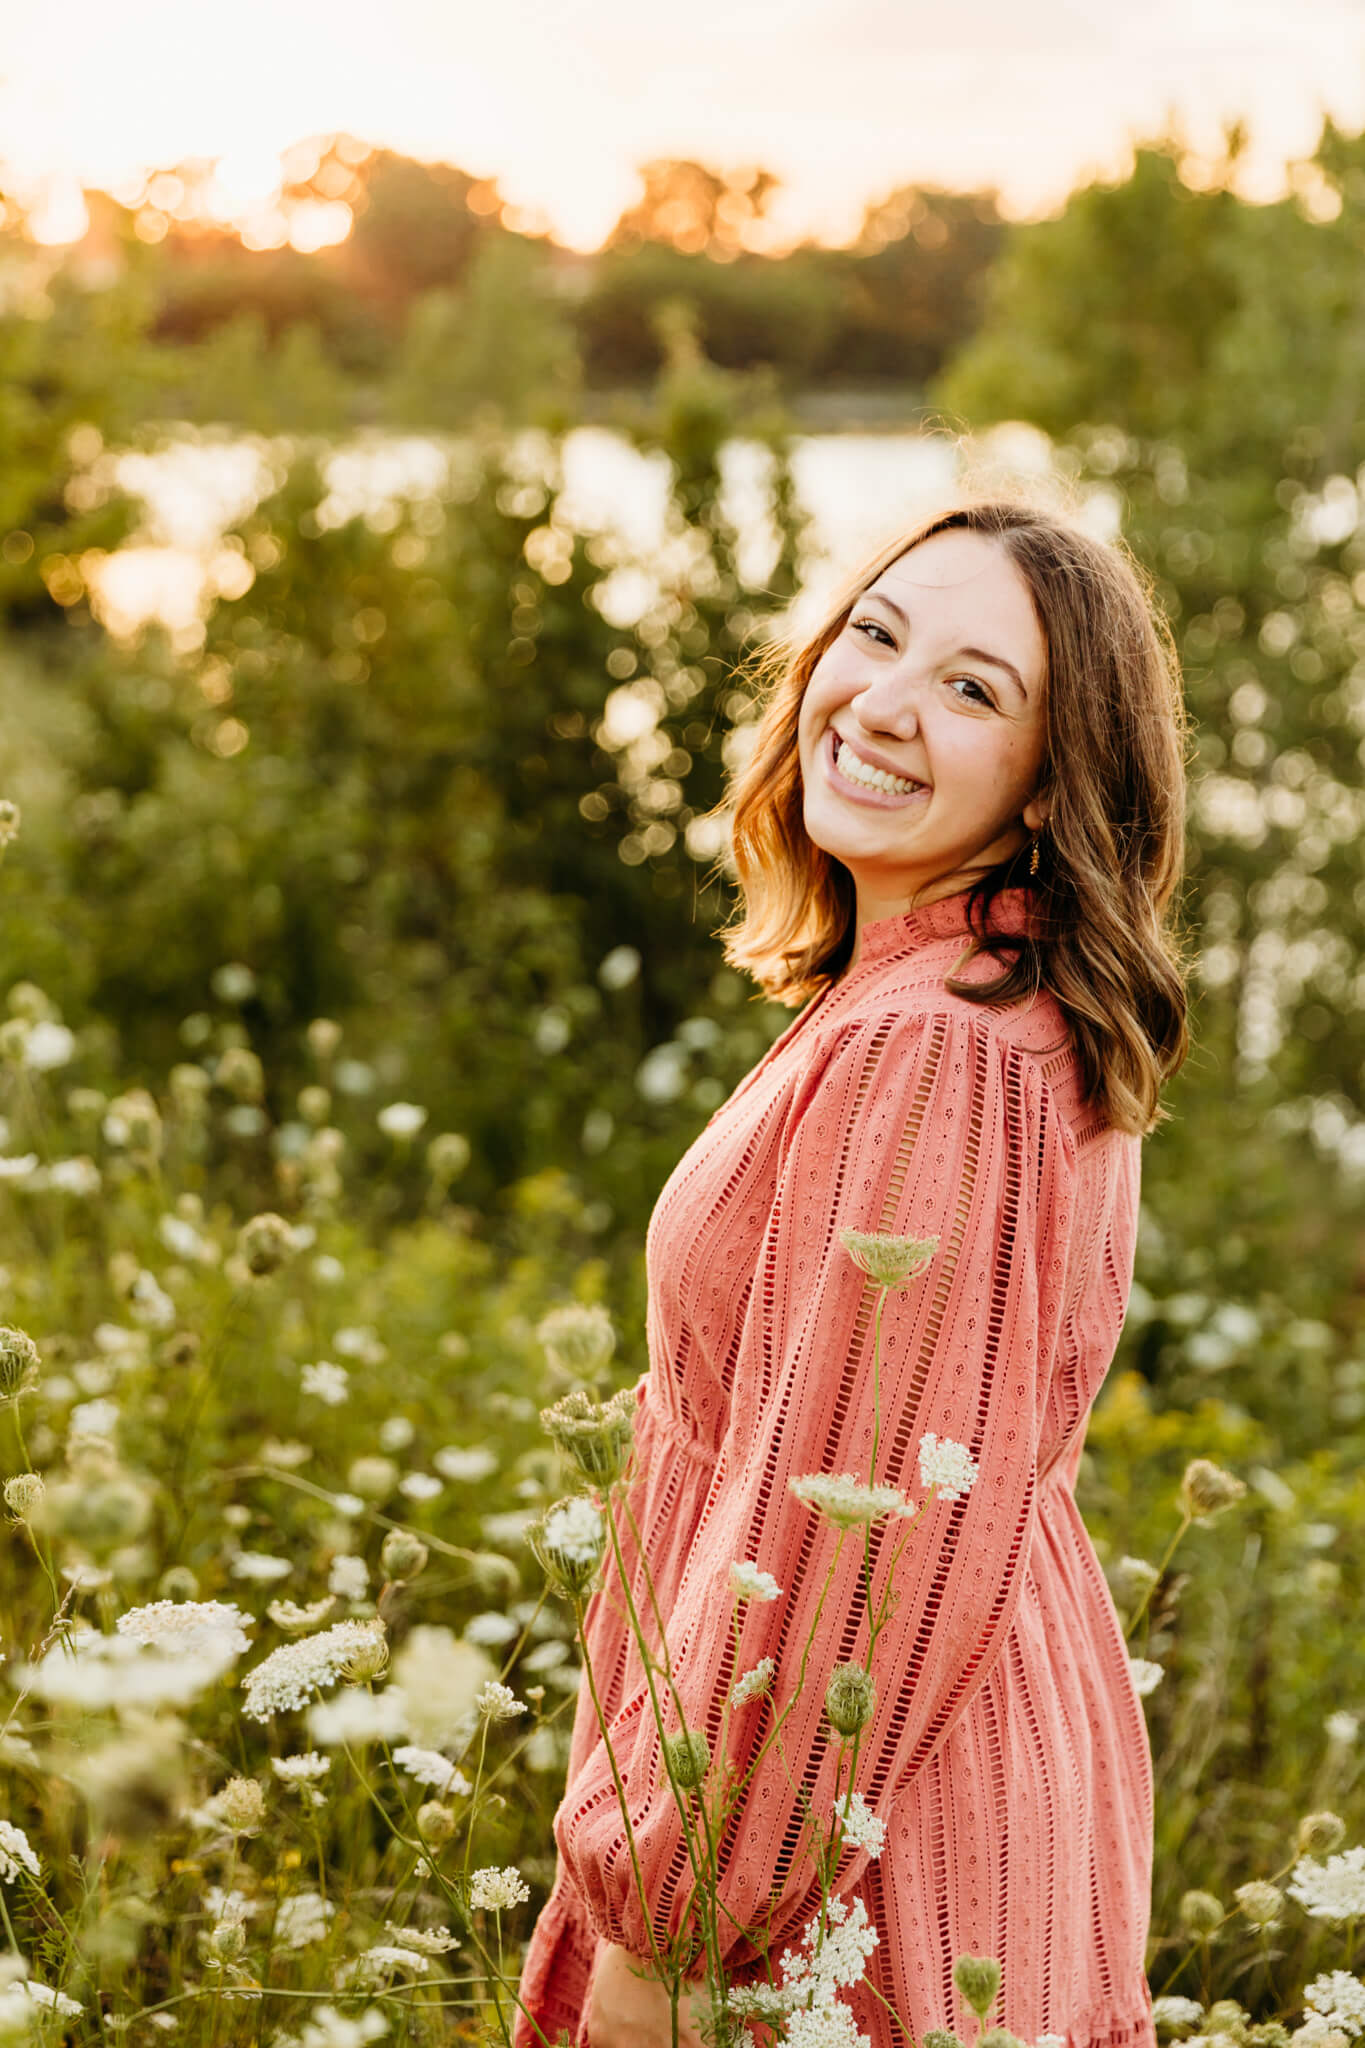 high school senior in a pink dress looking over shoulder in a field of wildflowers